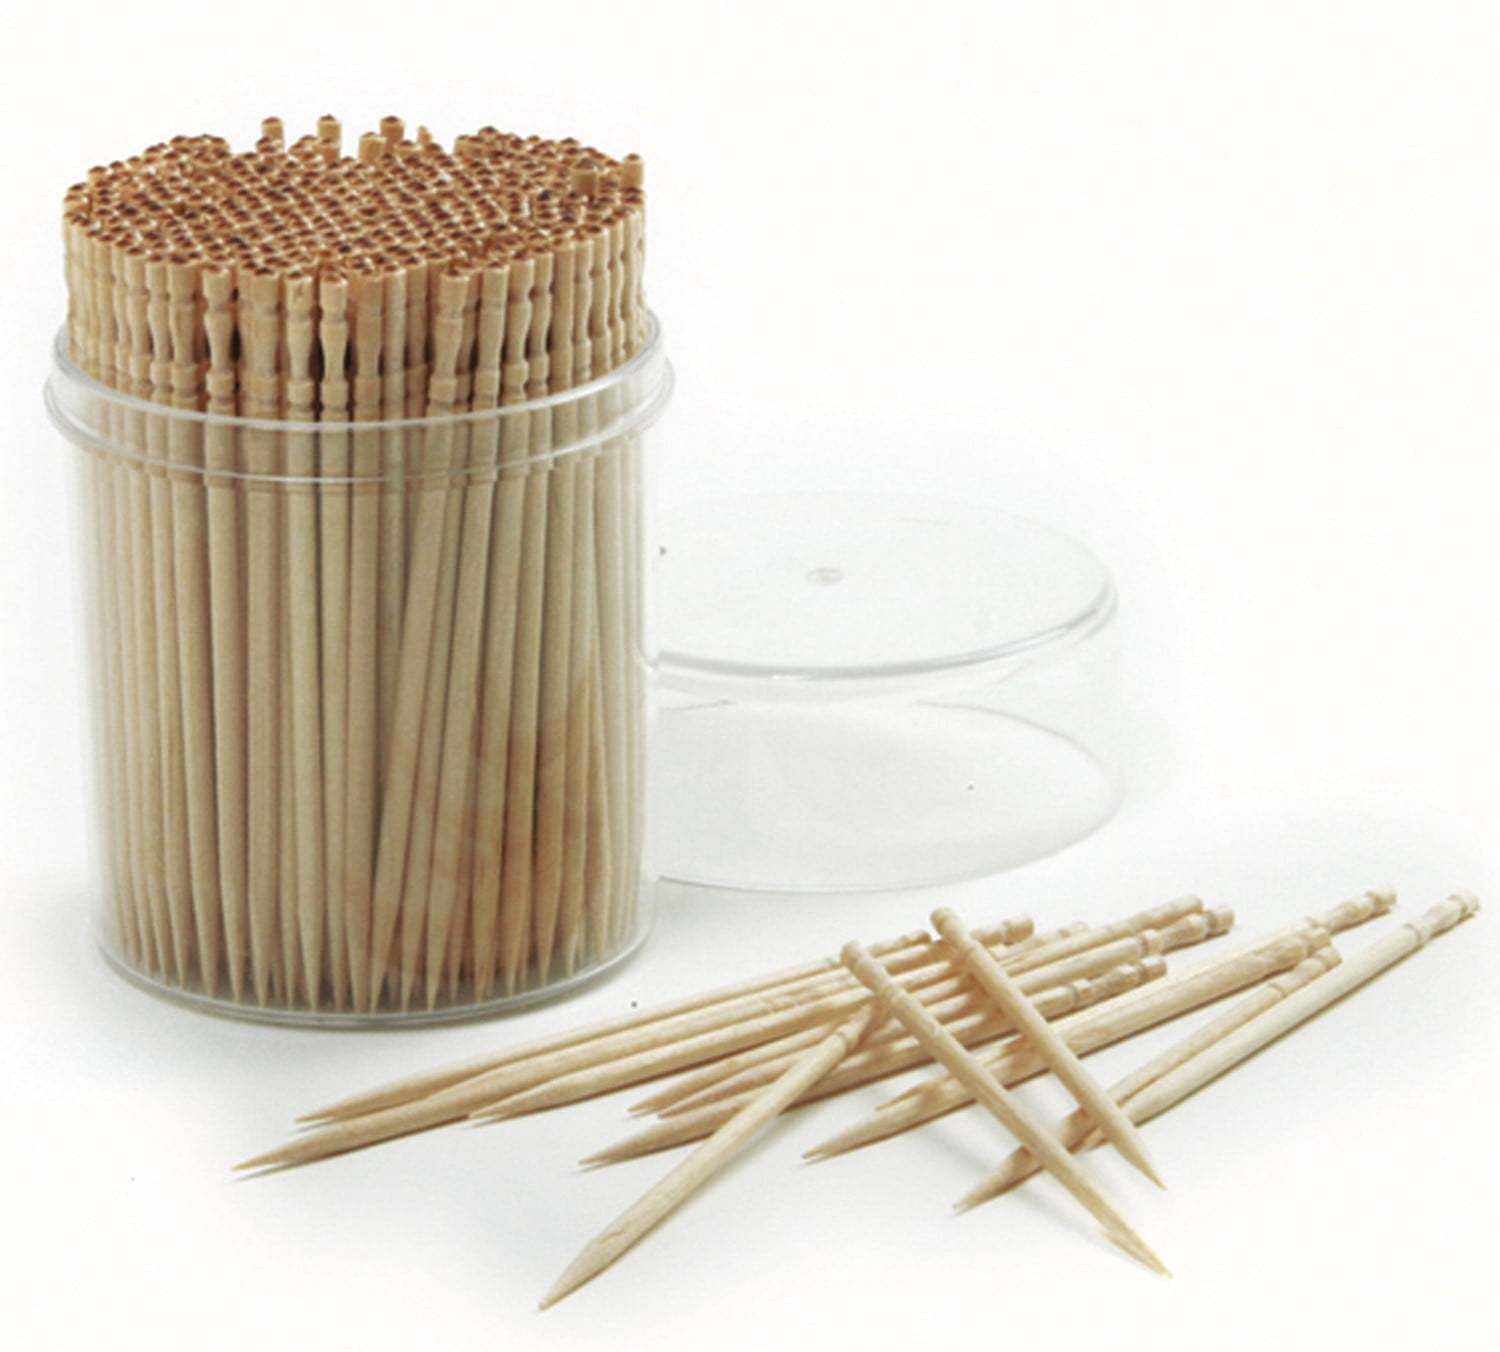 Mint Individual Birchwood Toothpicks Wrapped in Polybag Menthol Wooden Toothpick,Package of 1000